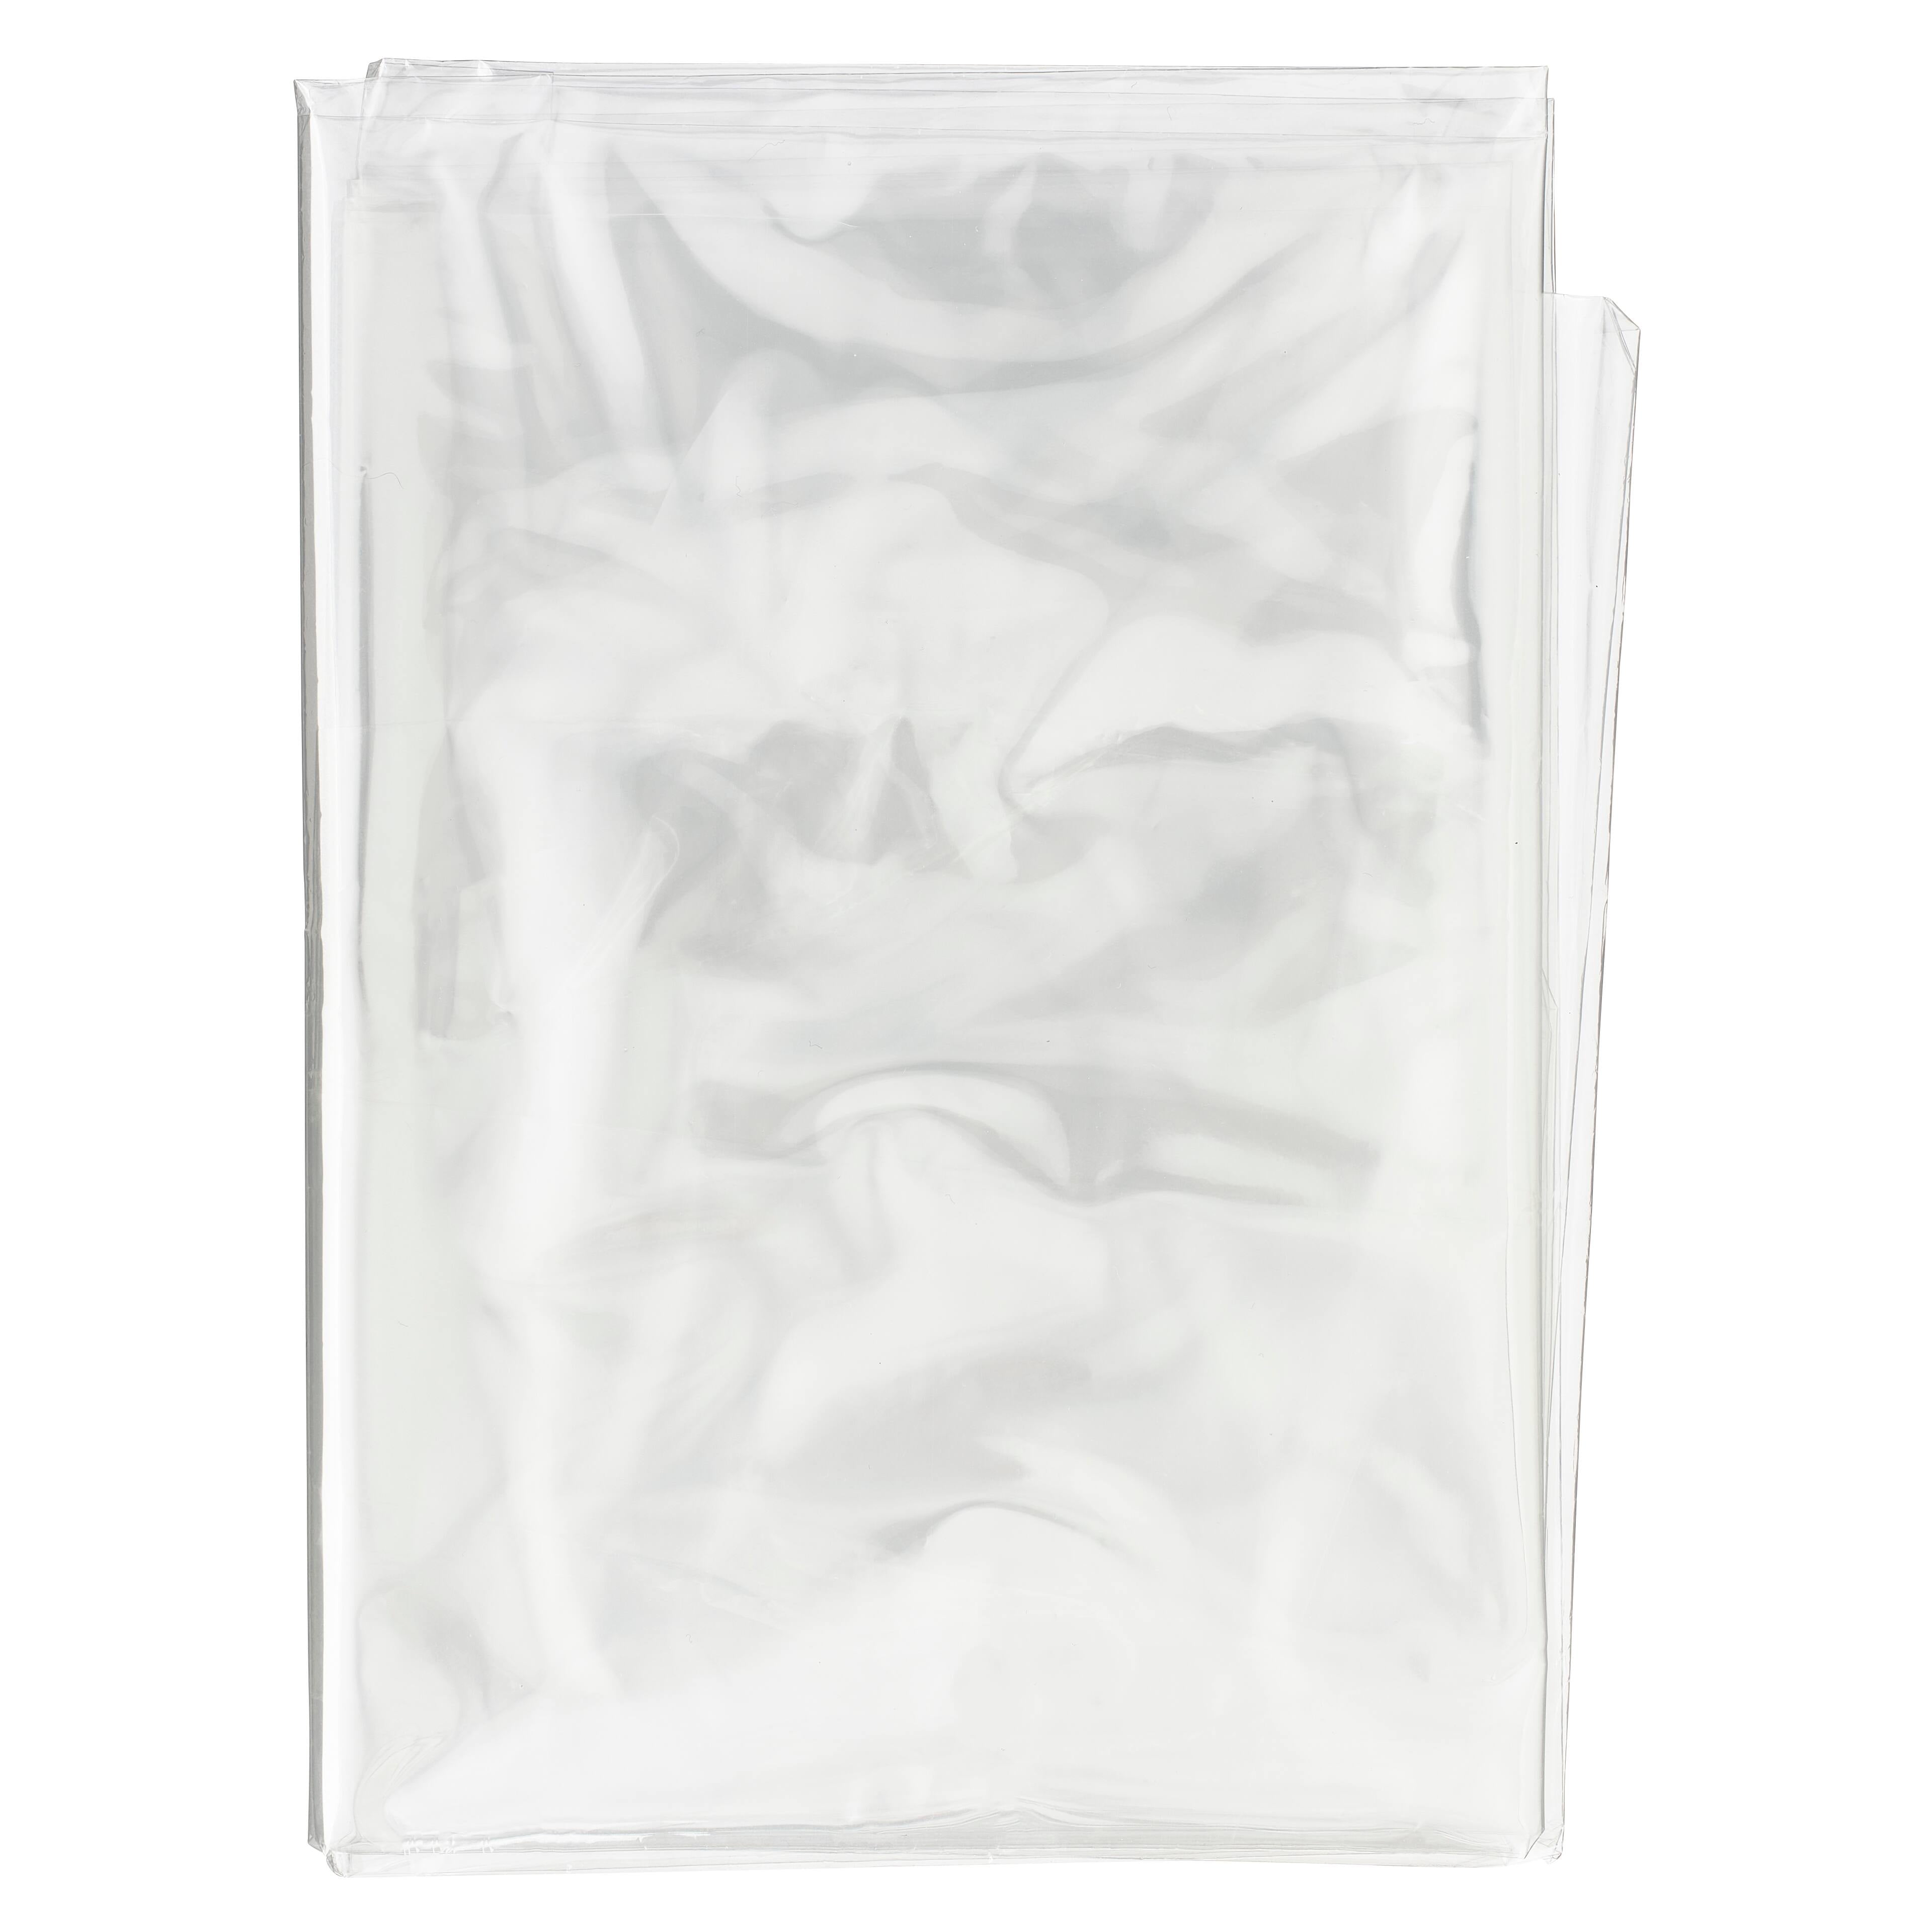 Cellophane Shrink Wrap Bag, 30 x 24 in, Clear, 1ct